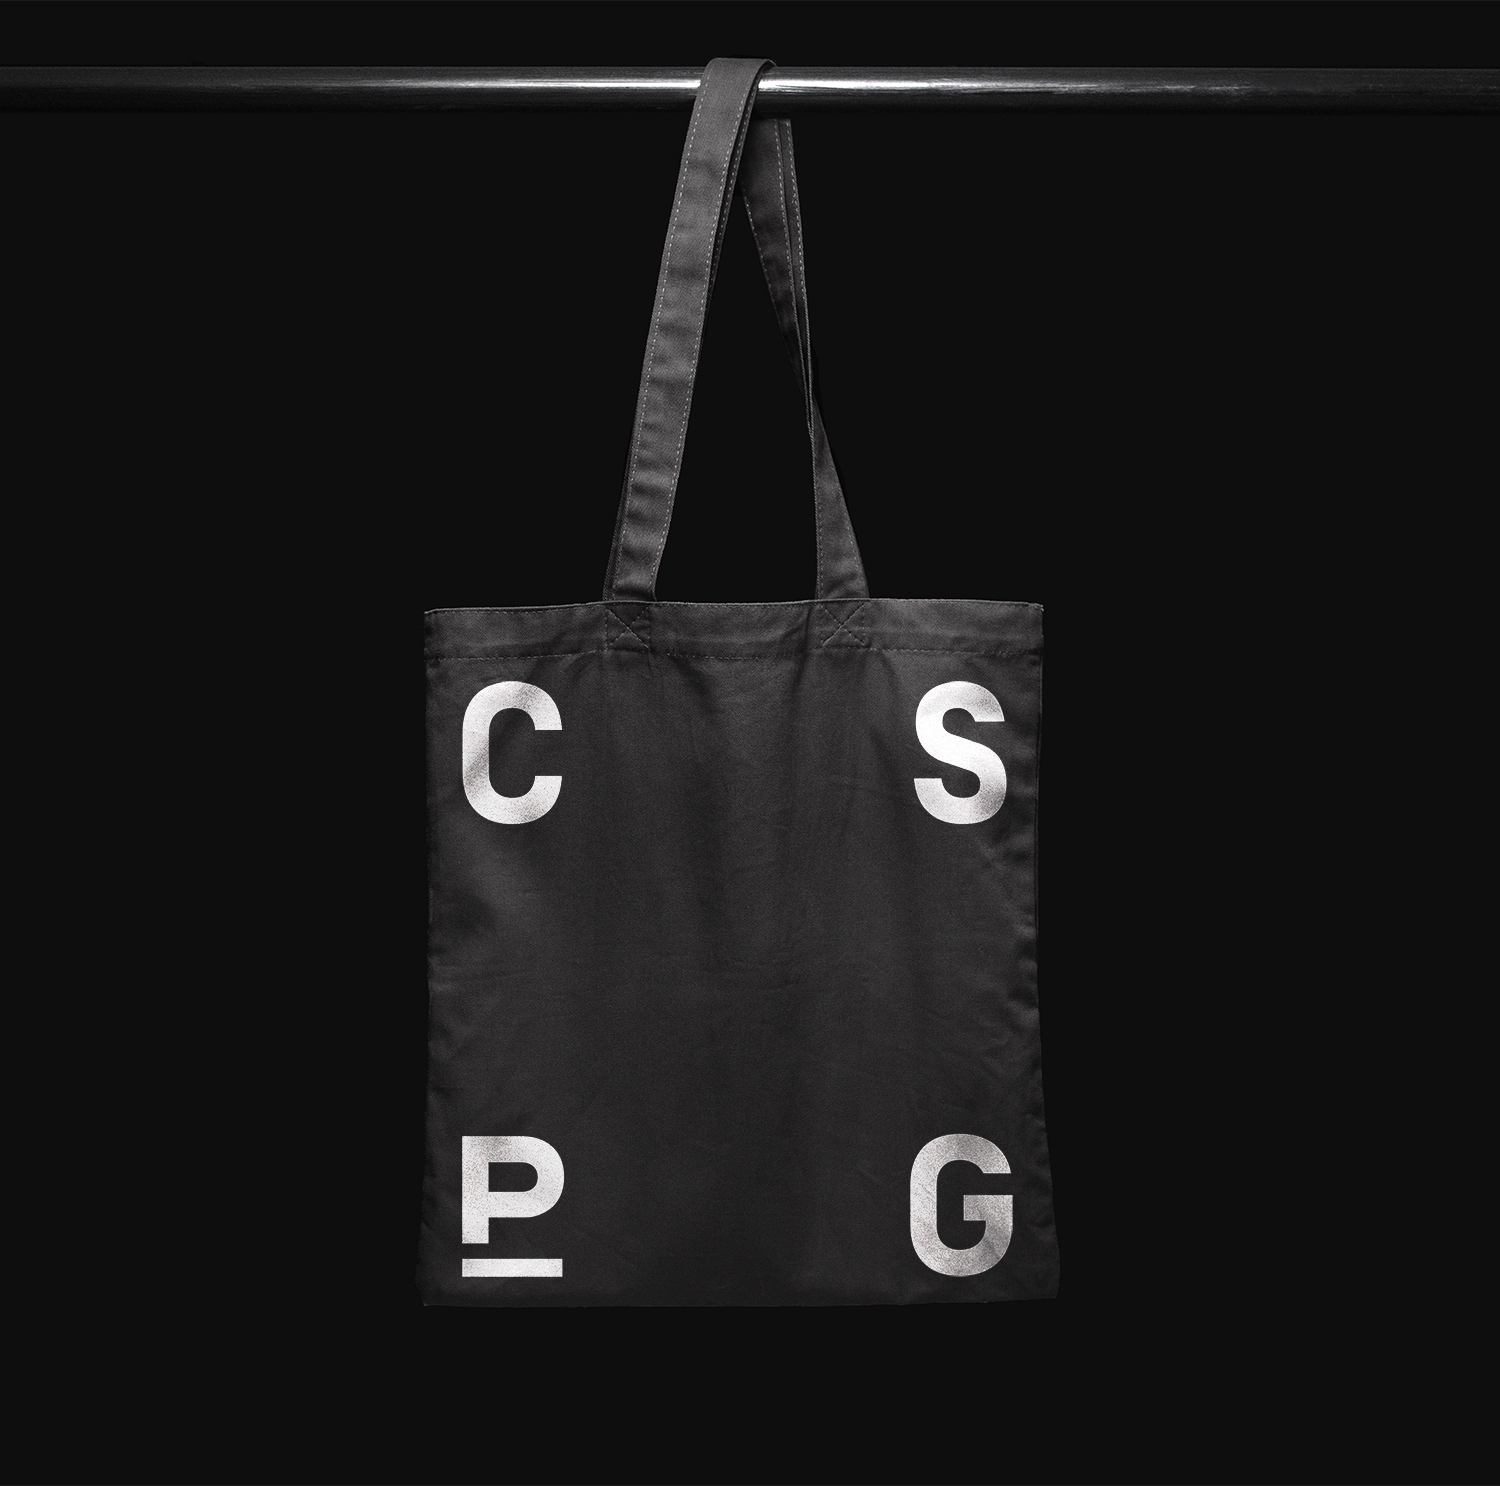 Tote Bag Design – Centre for the Study of Political Graphics by Blok, Canada